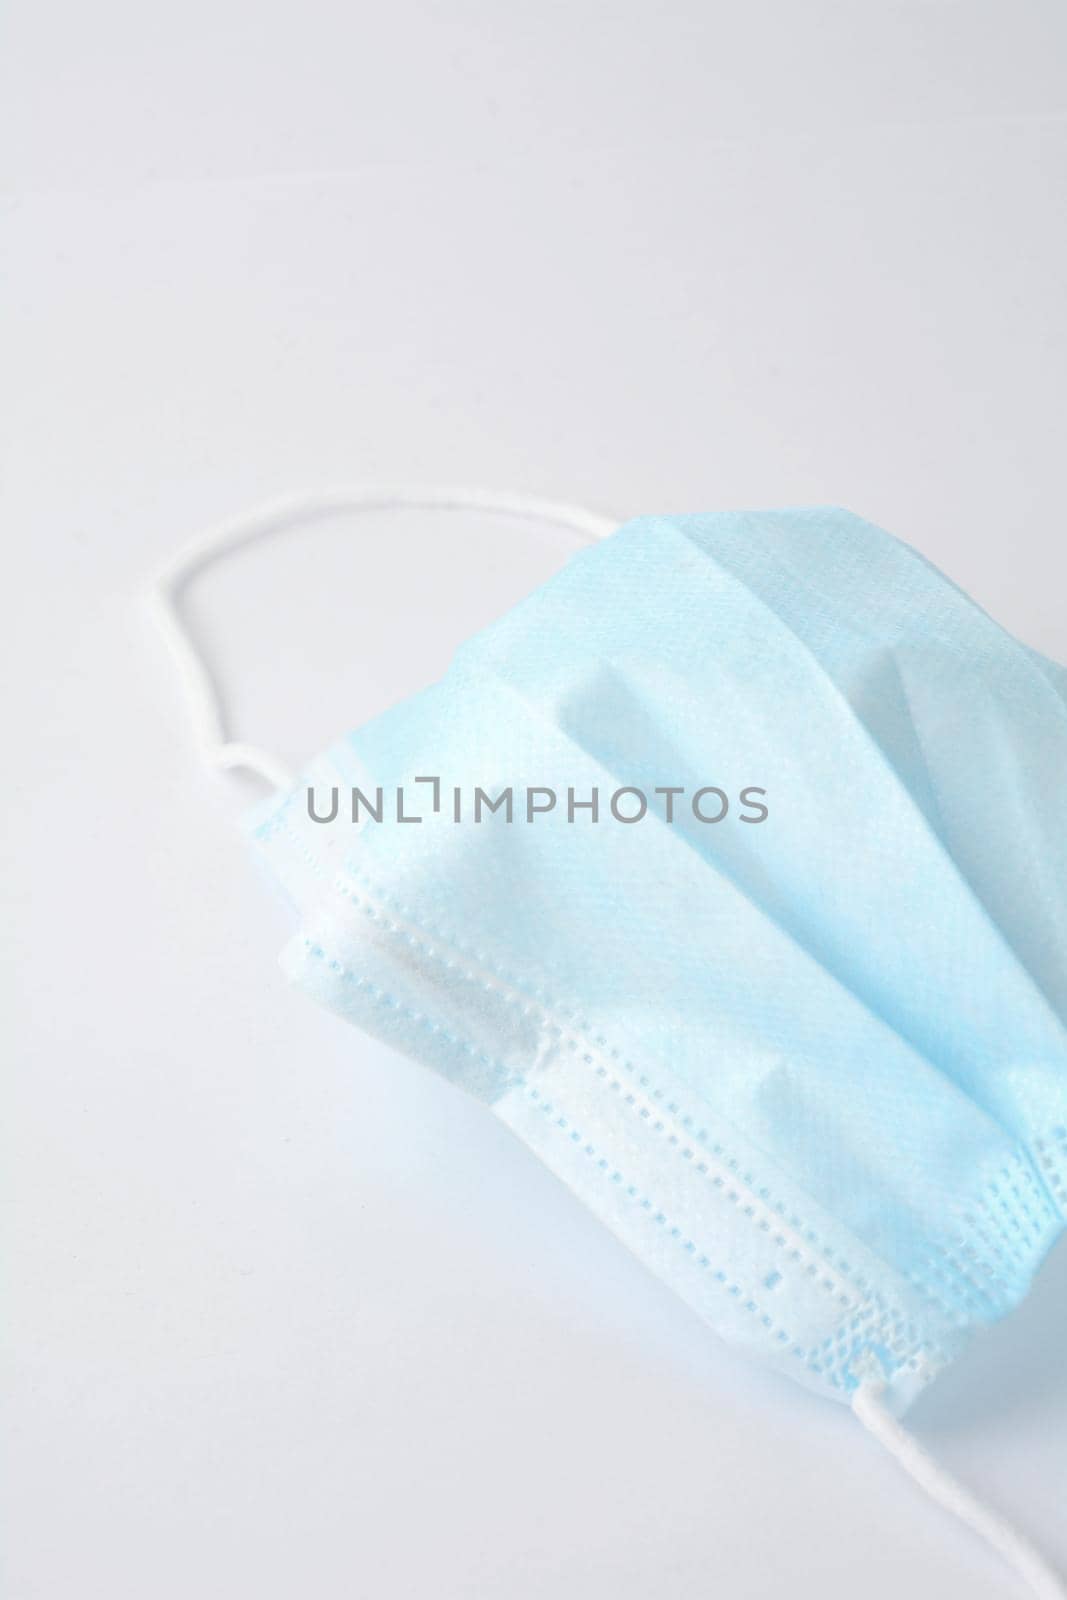 Blue surgical face mask on white background by hamik